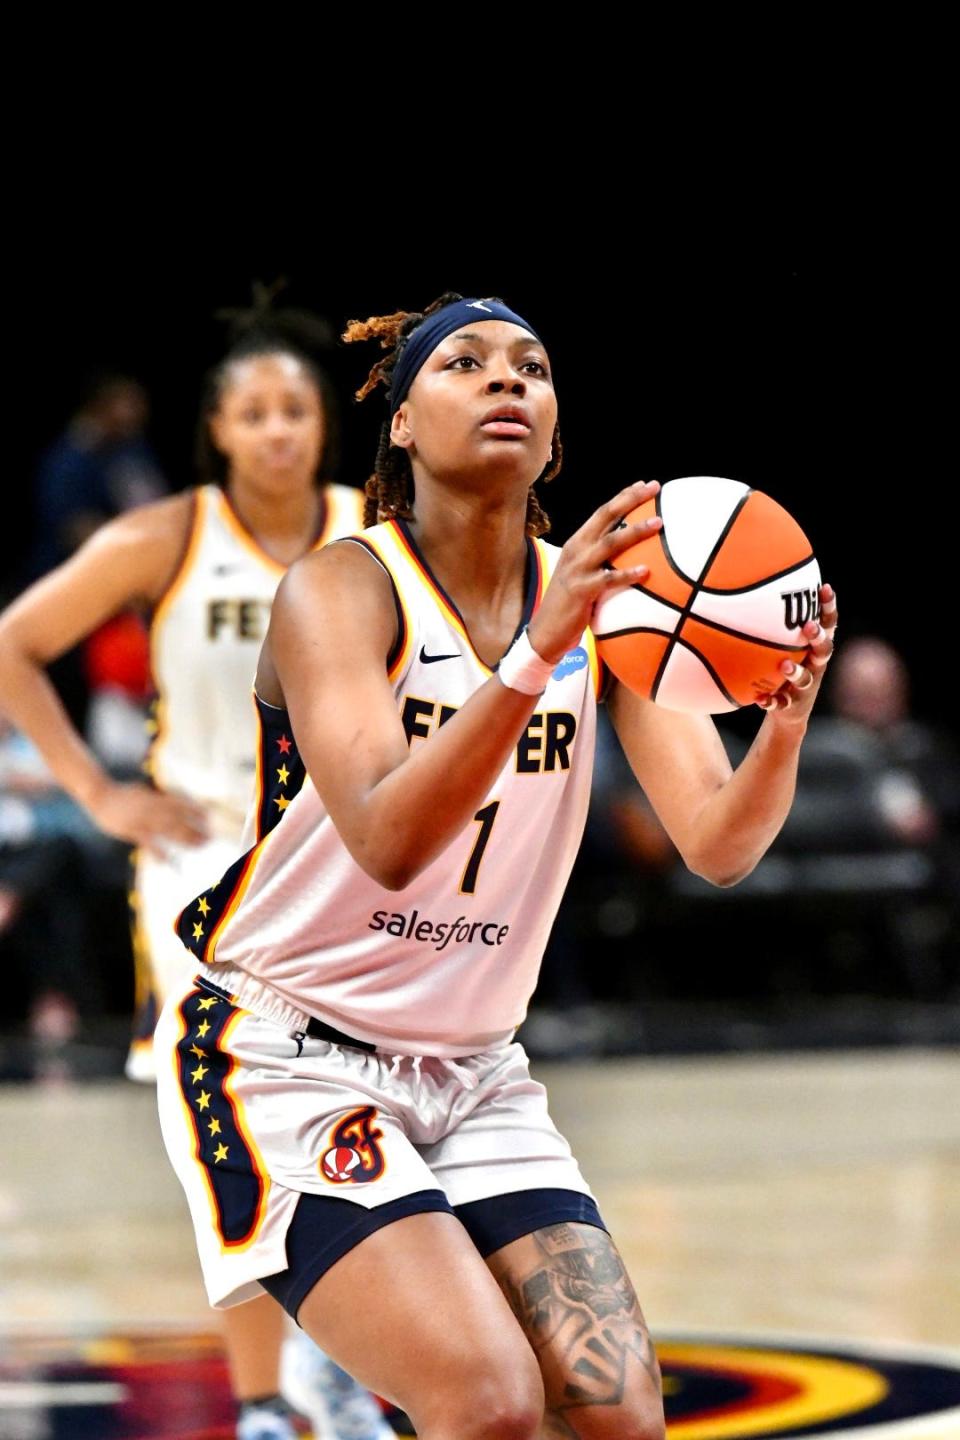 Indiana's NaLyssa Smith shoots a free throw as the Indiana Fever host the Chicago Sky in a preseason game at Gainbridge Fieldhouse in Indianapolis on April 30, 2022.